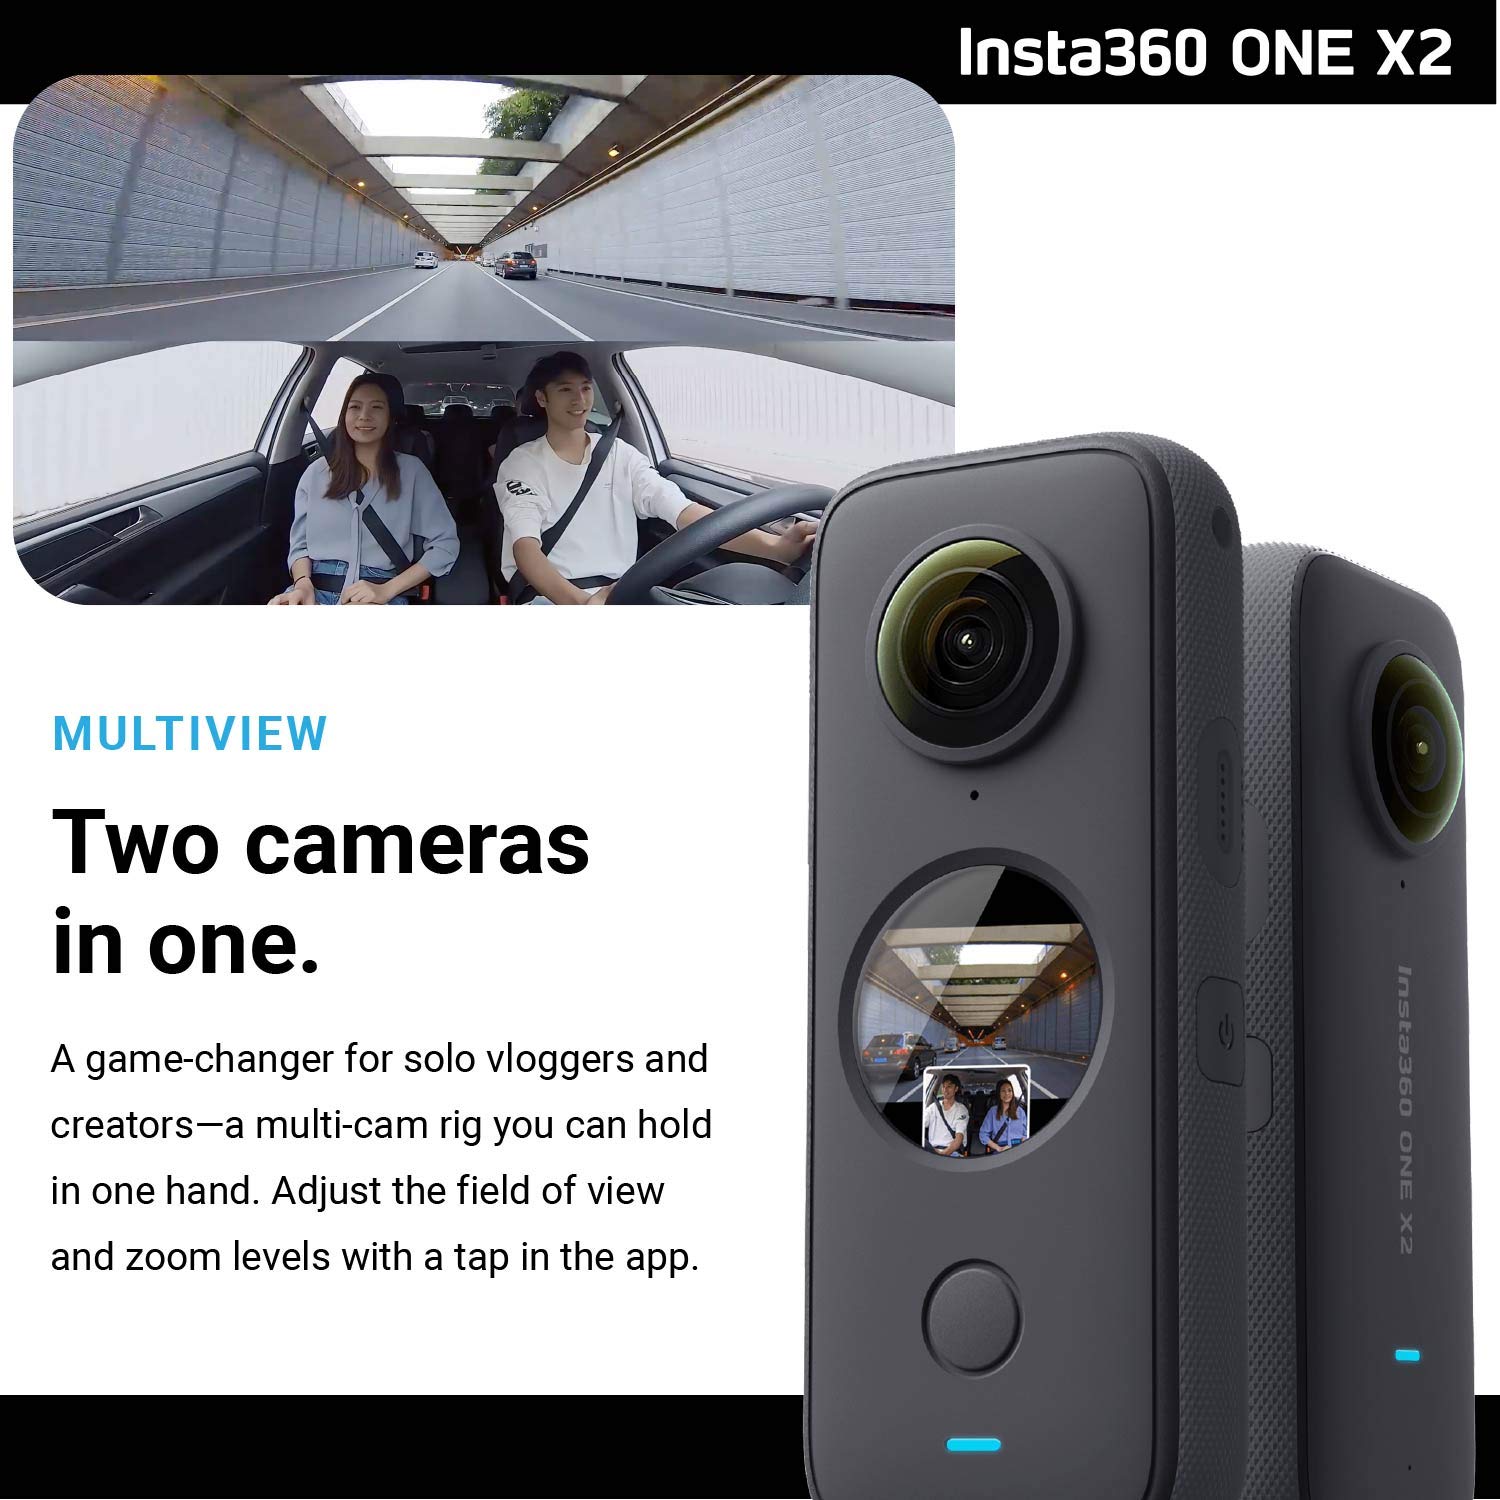 Insta360 ONE X2 360 Camera with Touchscreen - 5.7K30 360 Video, Front Steady Cam Mode, 18MP 360 Photo + InstaPano | Bundle Includes Bullet Time Kit & 128GB Memory Card (3 Items)